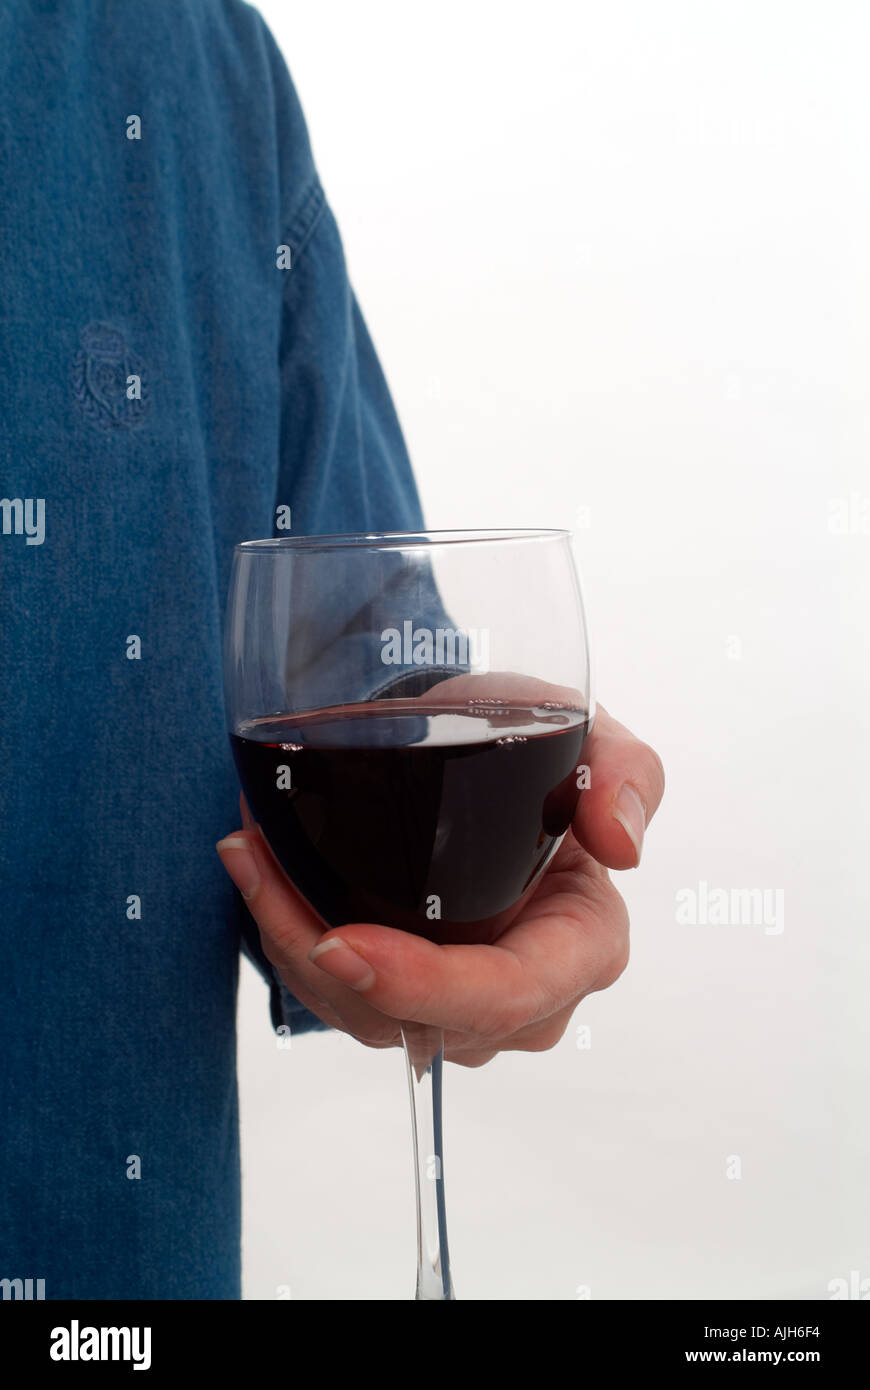 hand holding a glass of red wine Stock Photo